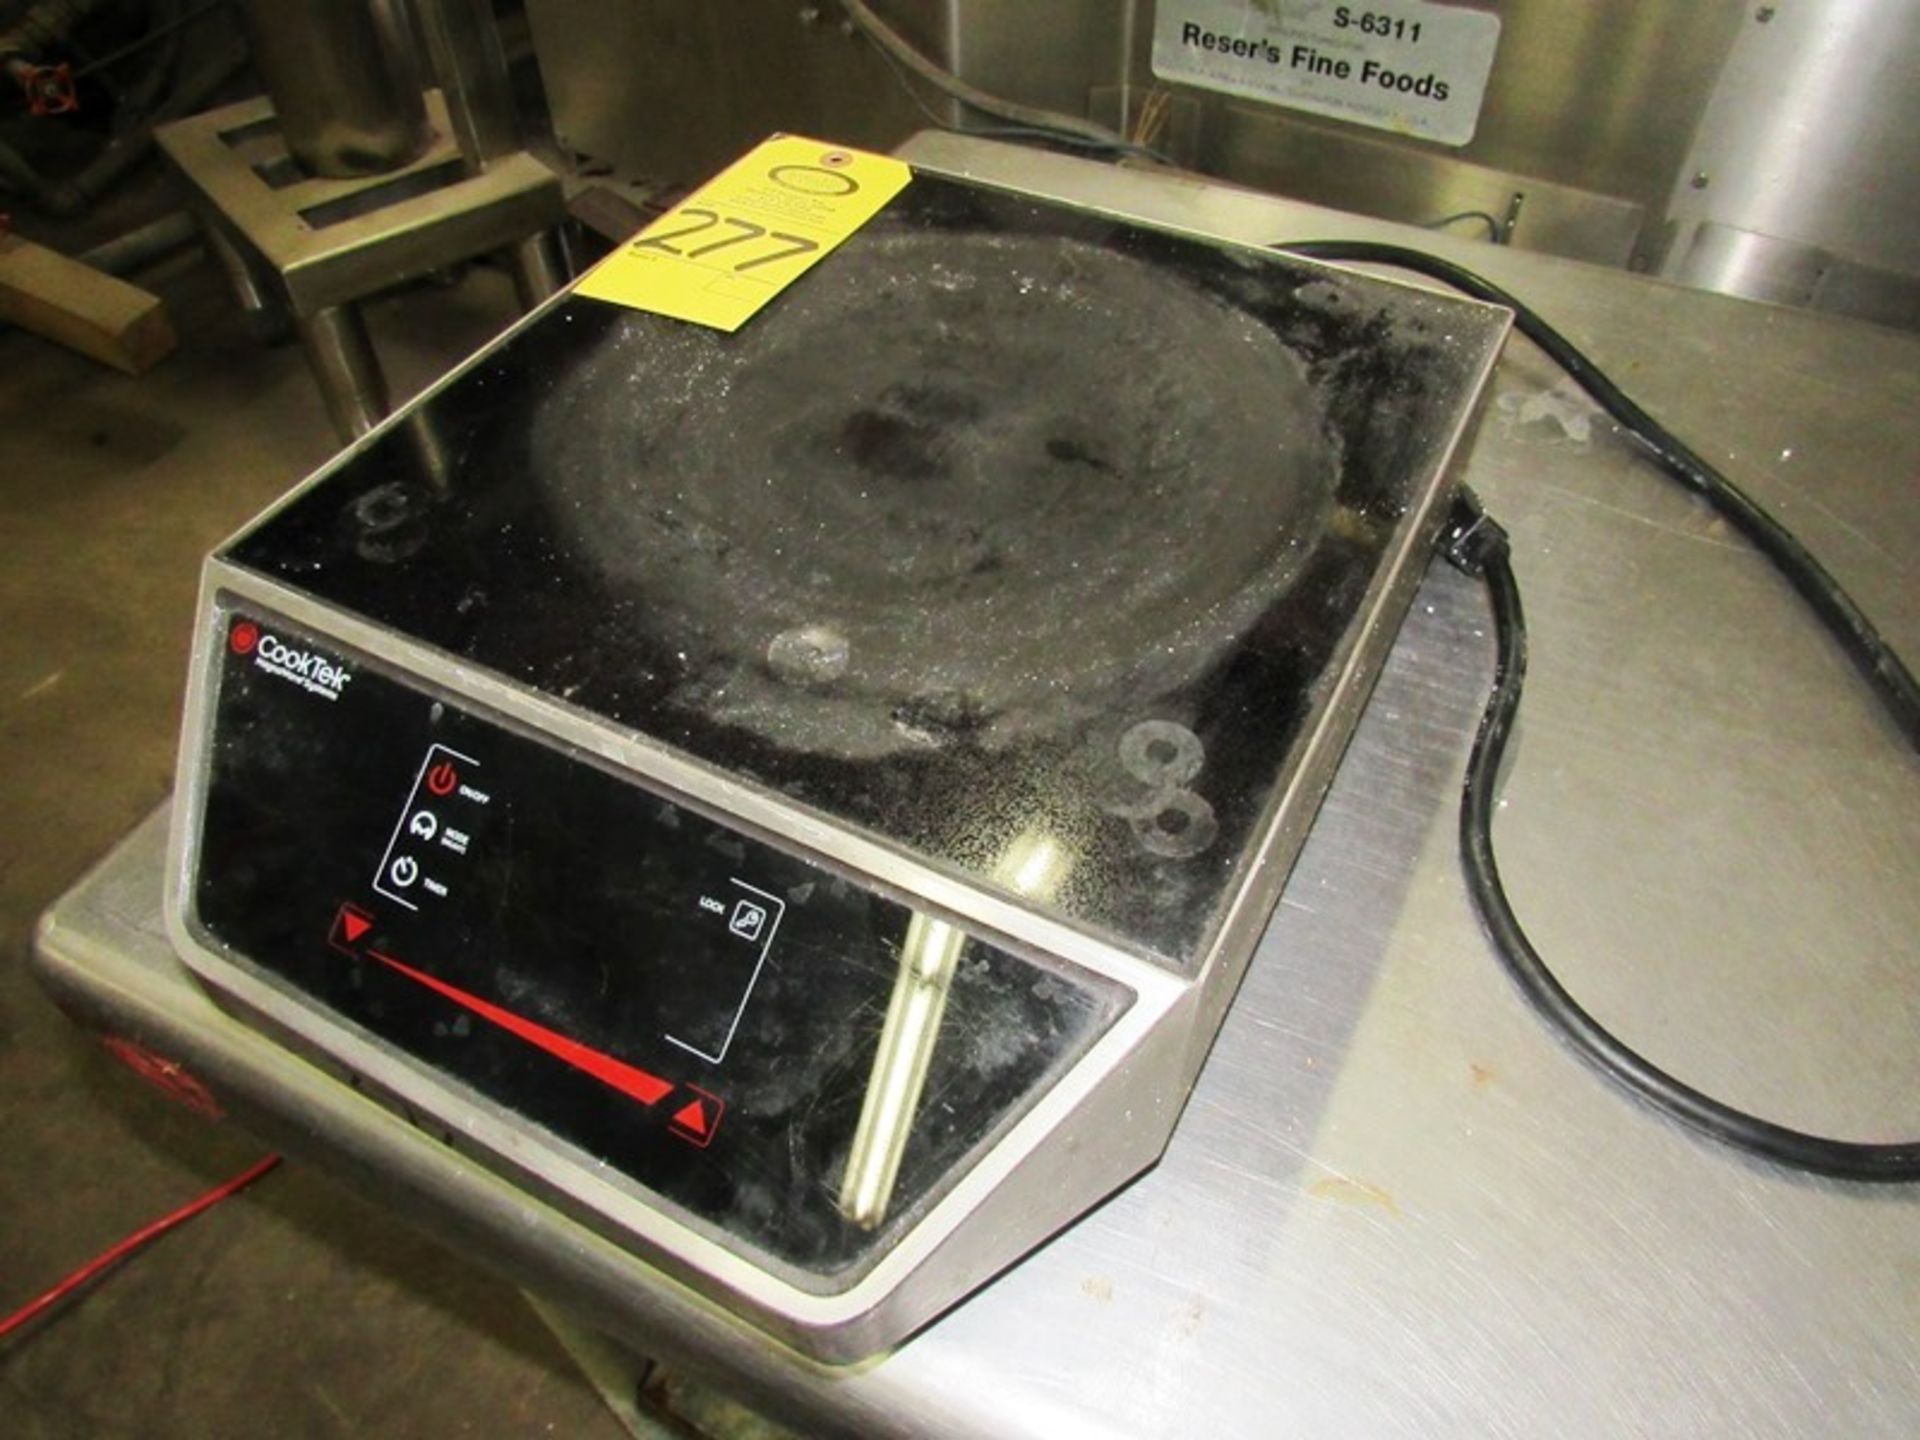 Cook Tek Mdl. MC3500G Induction Magna Wave Oven, Ser. #6204-13259-C0654, 200/240 volts (Located in